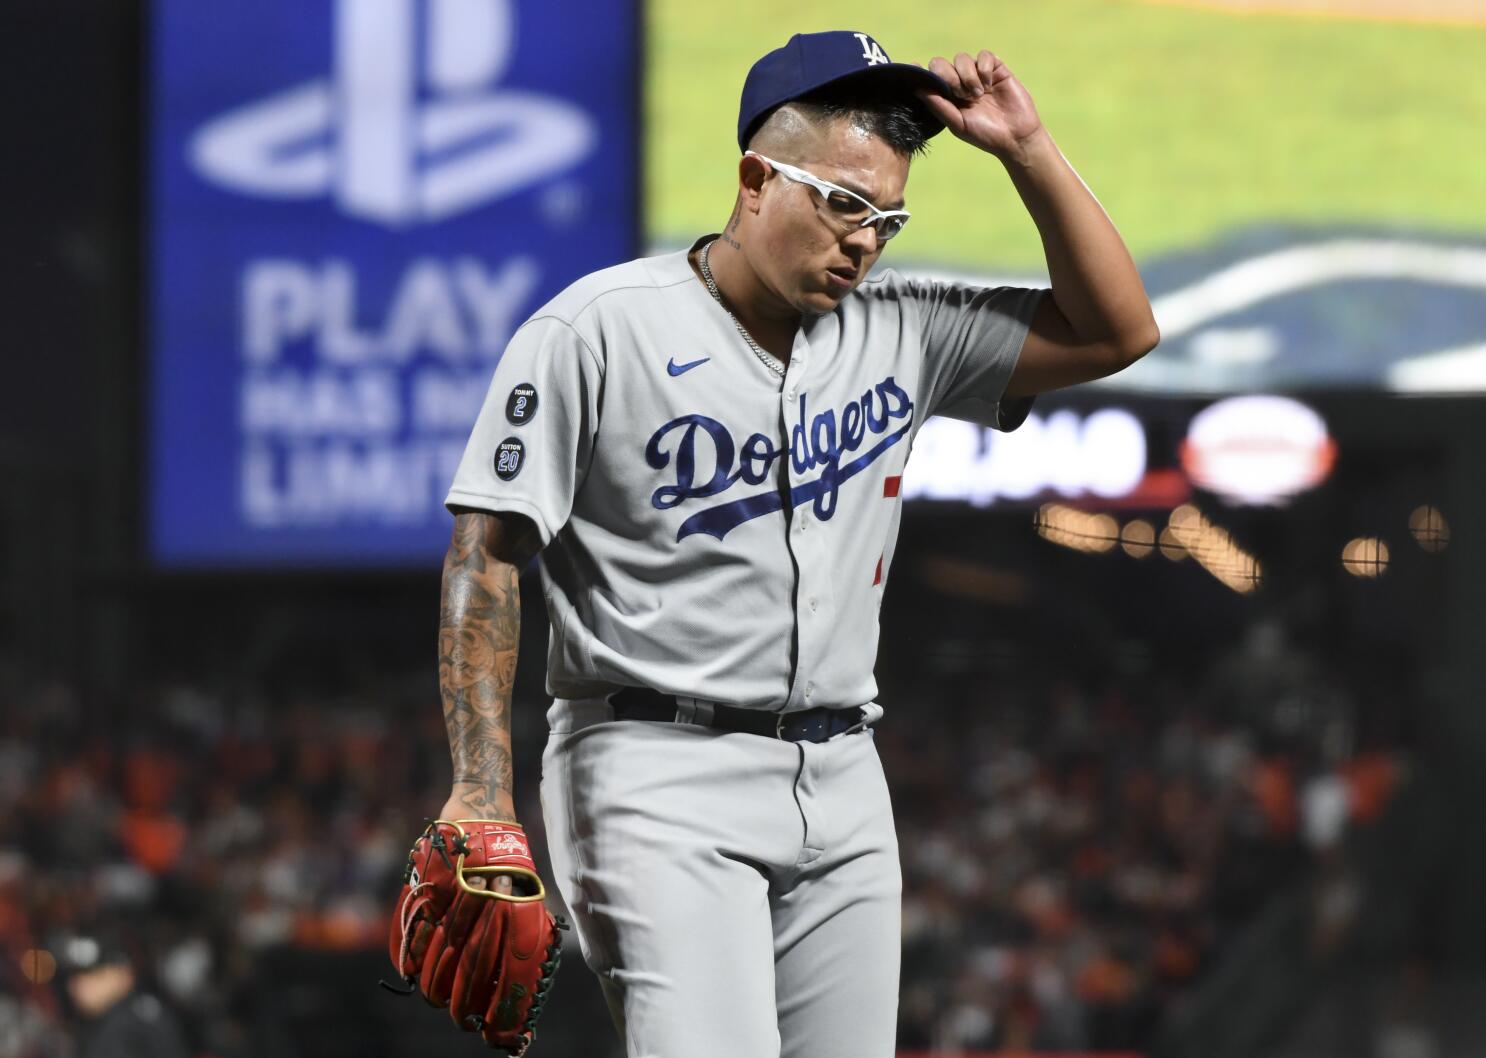 Julio Urias no longer a fan favorite after disappointing news with his, Julio  Urias